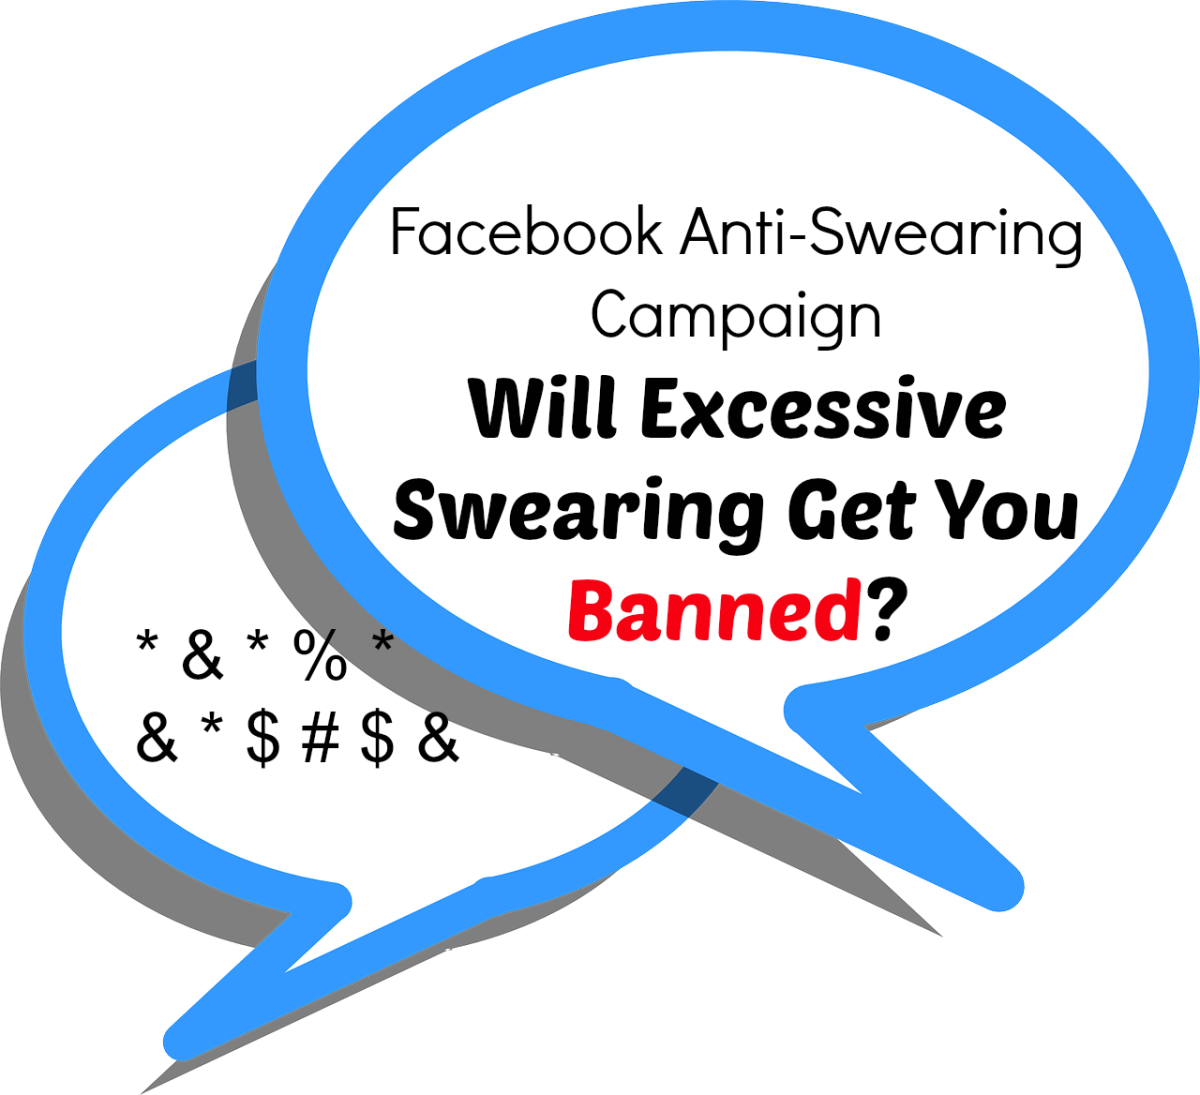 Can You Use The F Word on Facebook? No Swearing Campaign: Hoax?